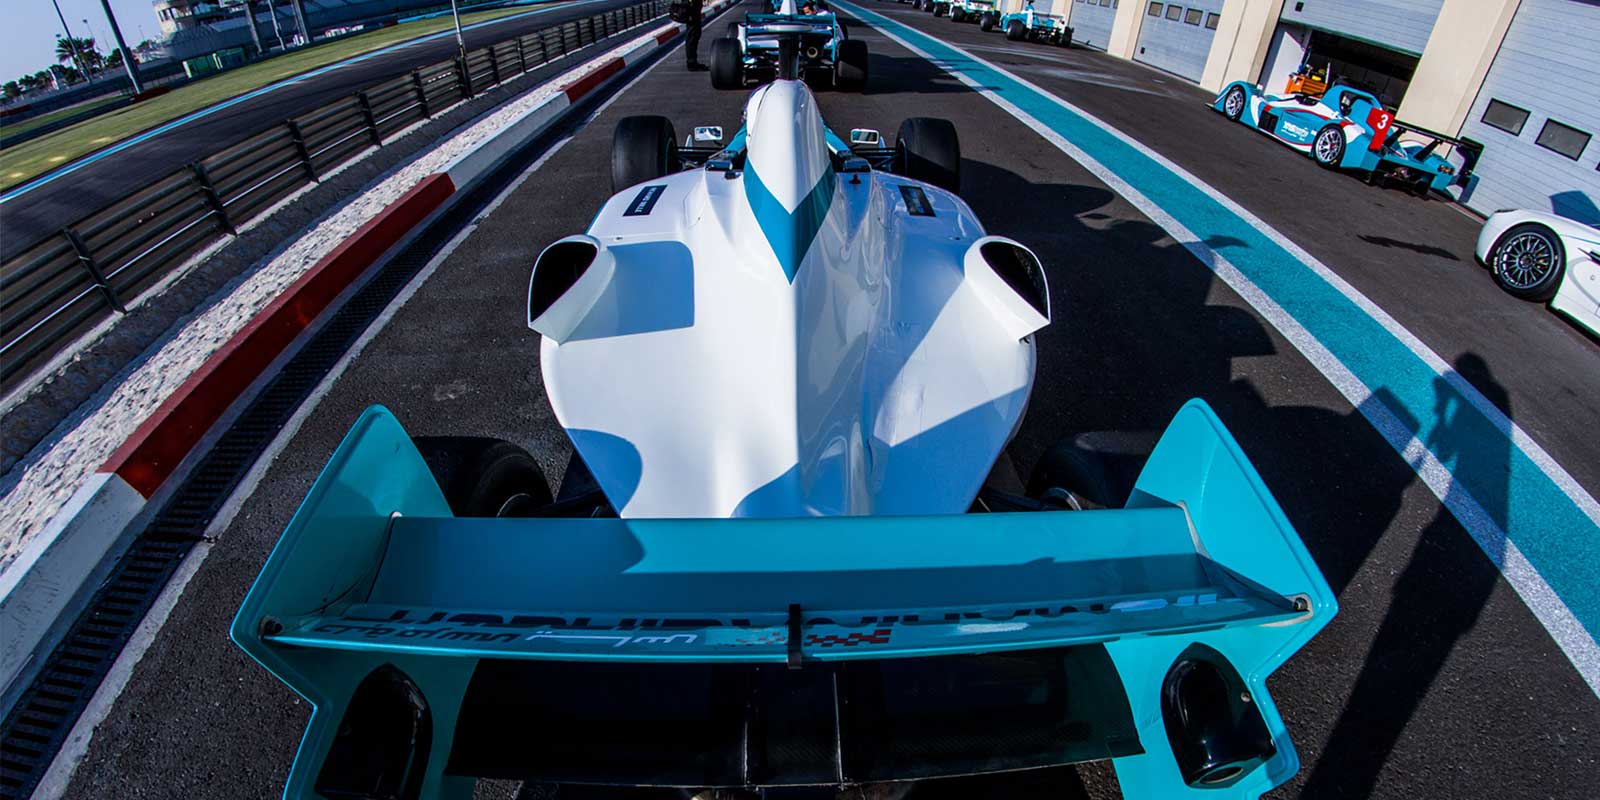 Things to do in Abu Dhabi? You Should be Racing F3000 Cars at the Yas Marina F1 Track